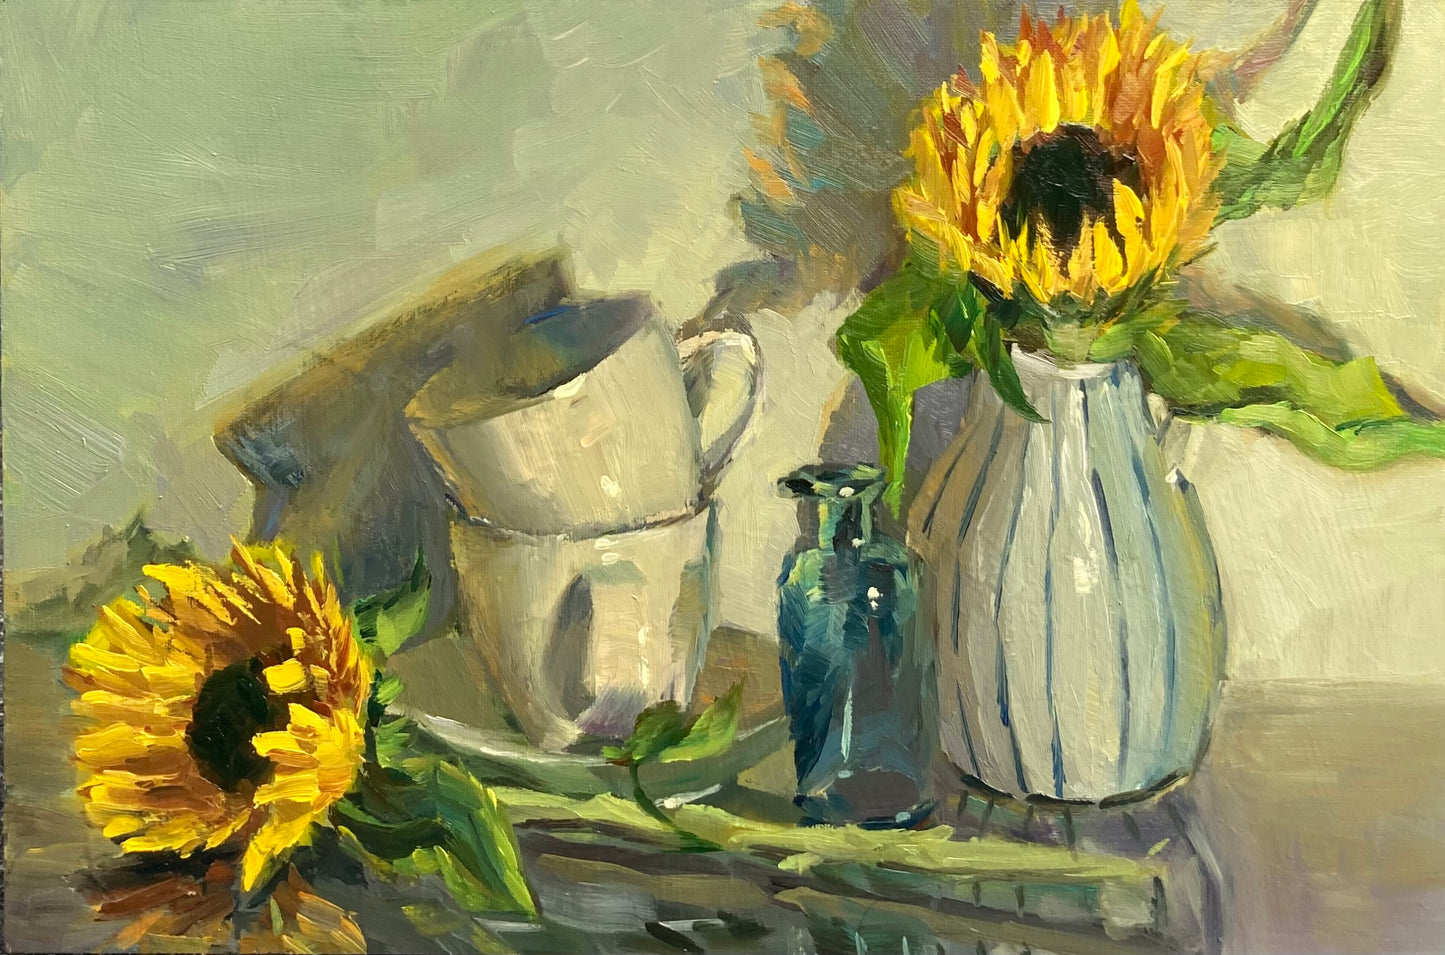 Sunflower Series 16 - Original Stilllife Painting, 12 by 8 inches